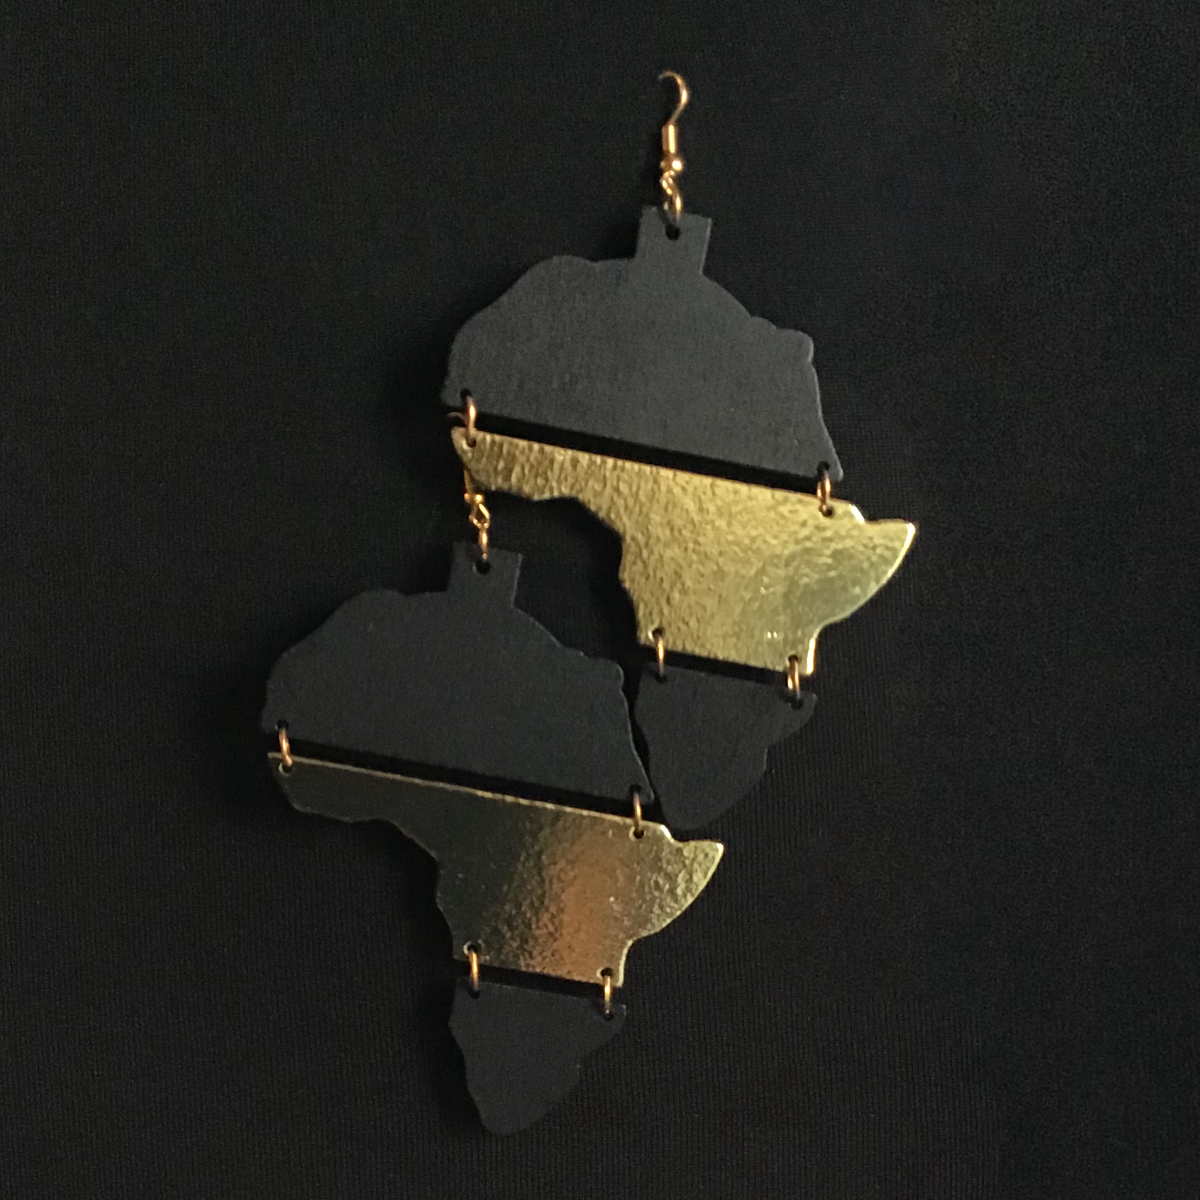 African Jewelry